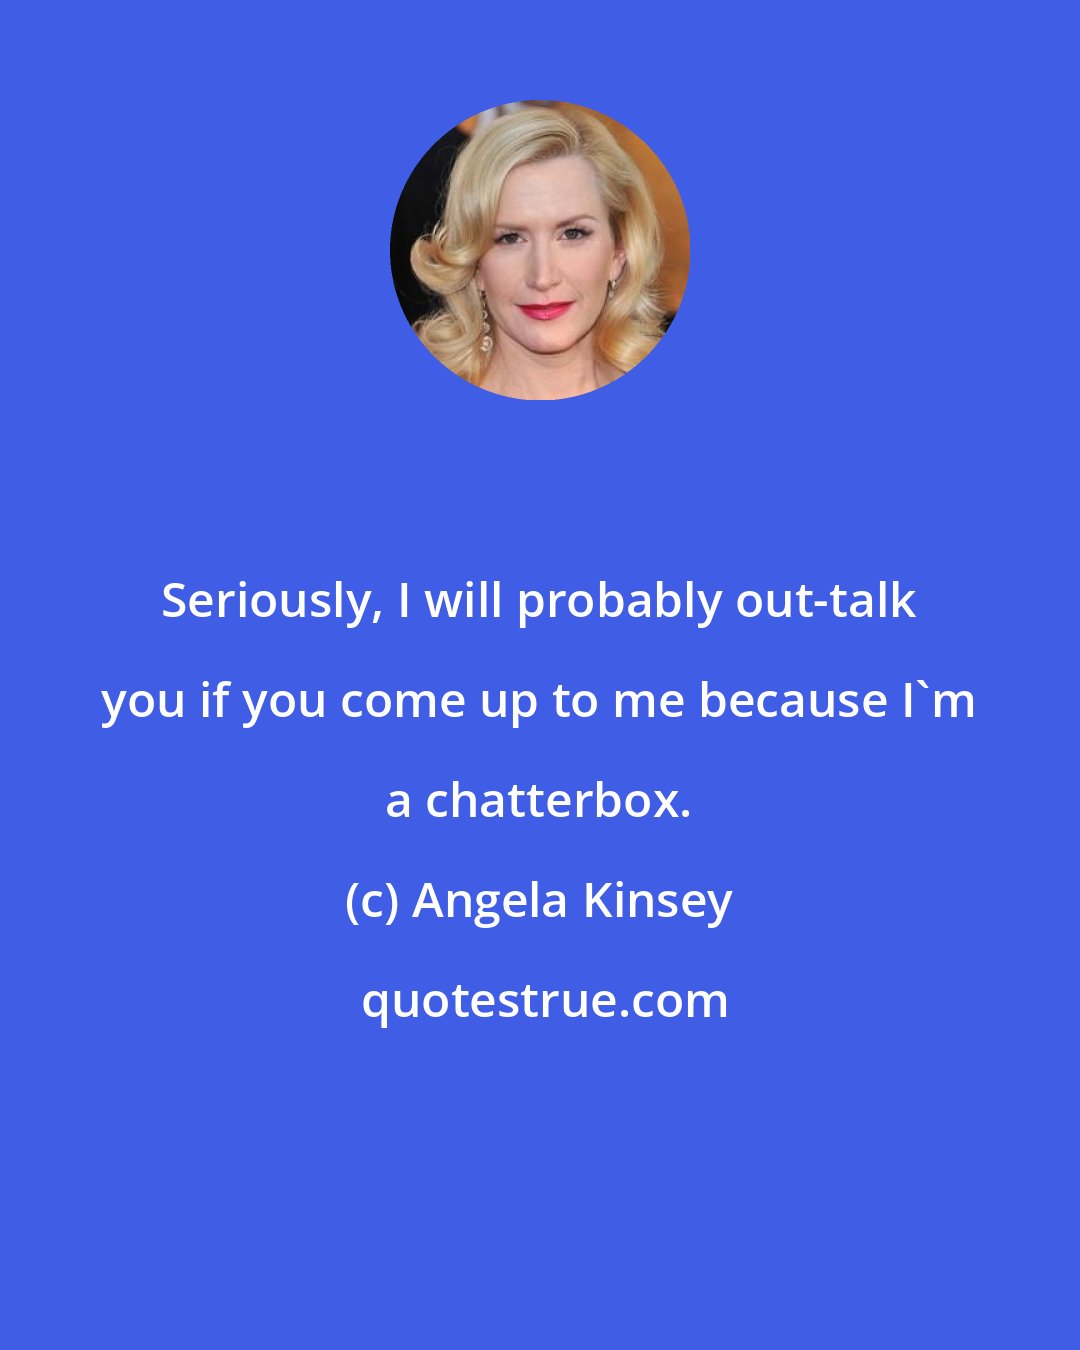 Angela Kinsey: Seriously, I will probably out-talk you if you come up to me because I'm a chatterbox.